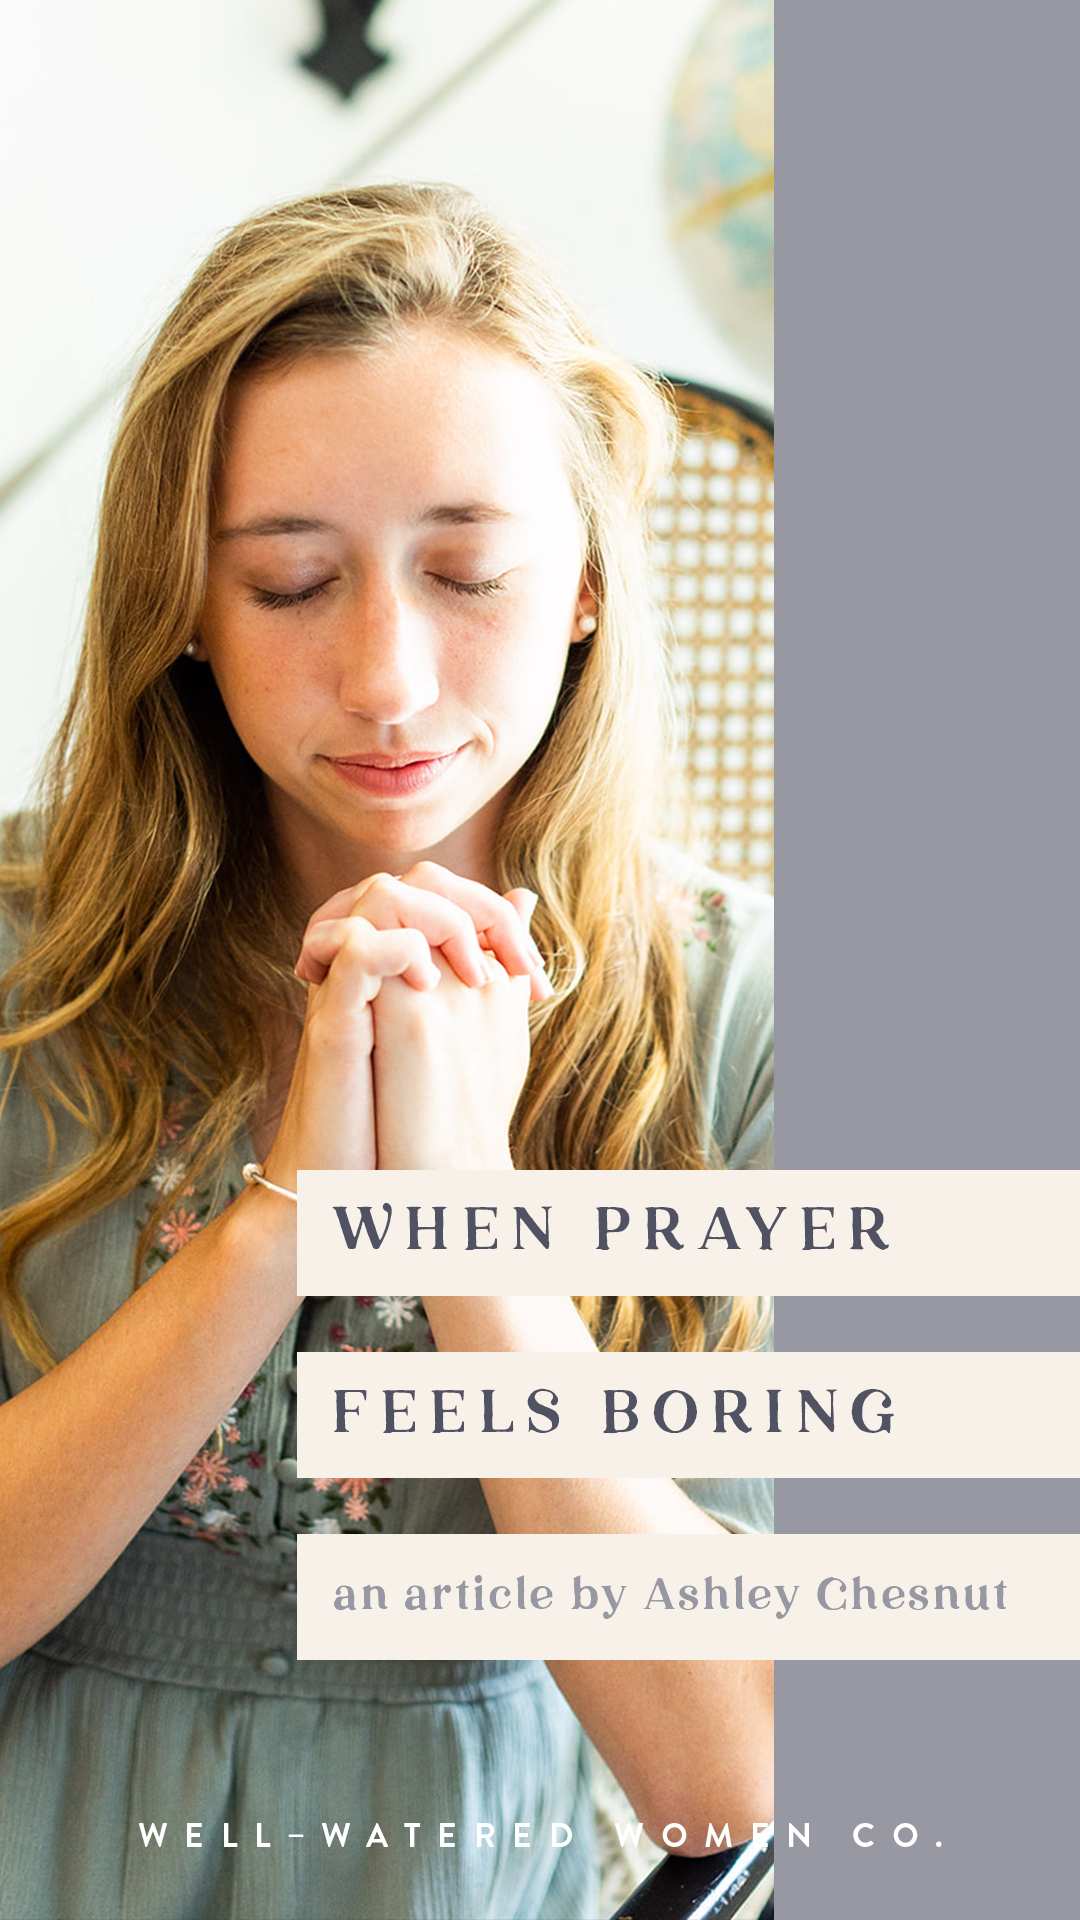 When Prayer Feels Boring-an article from Well-Watered Women